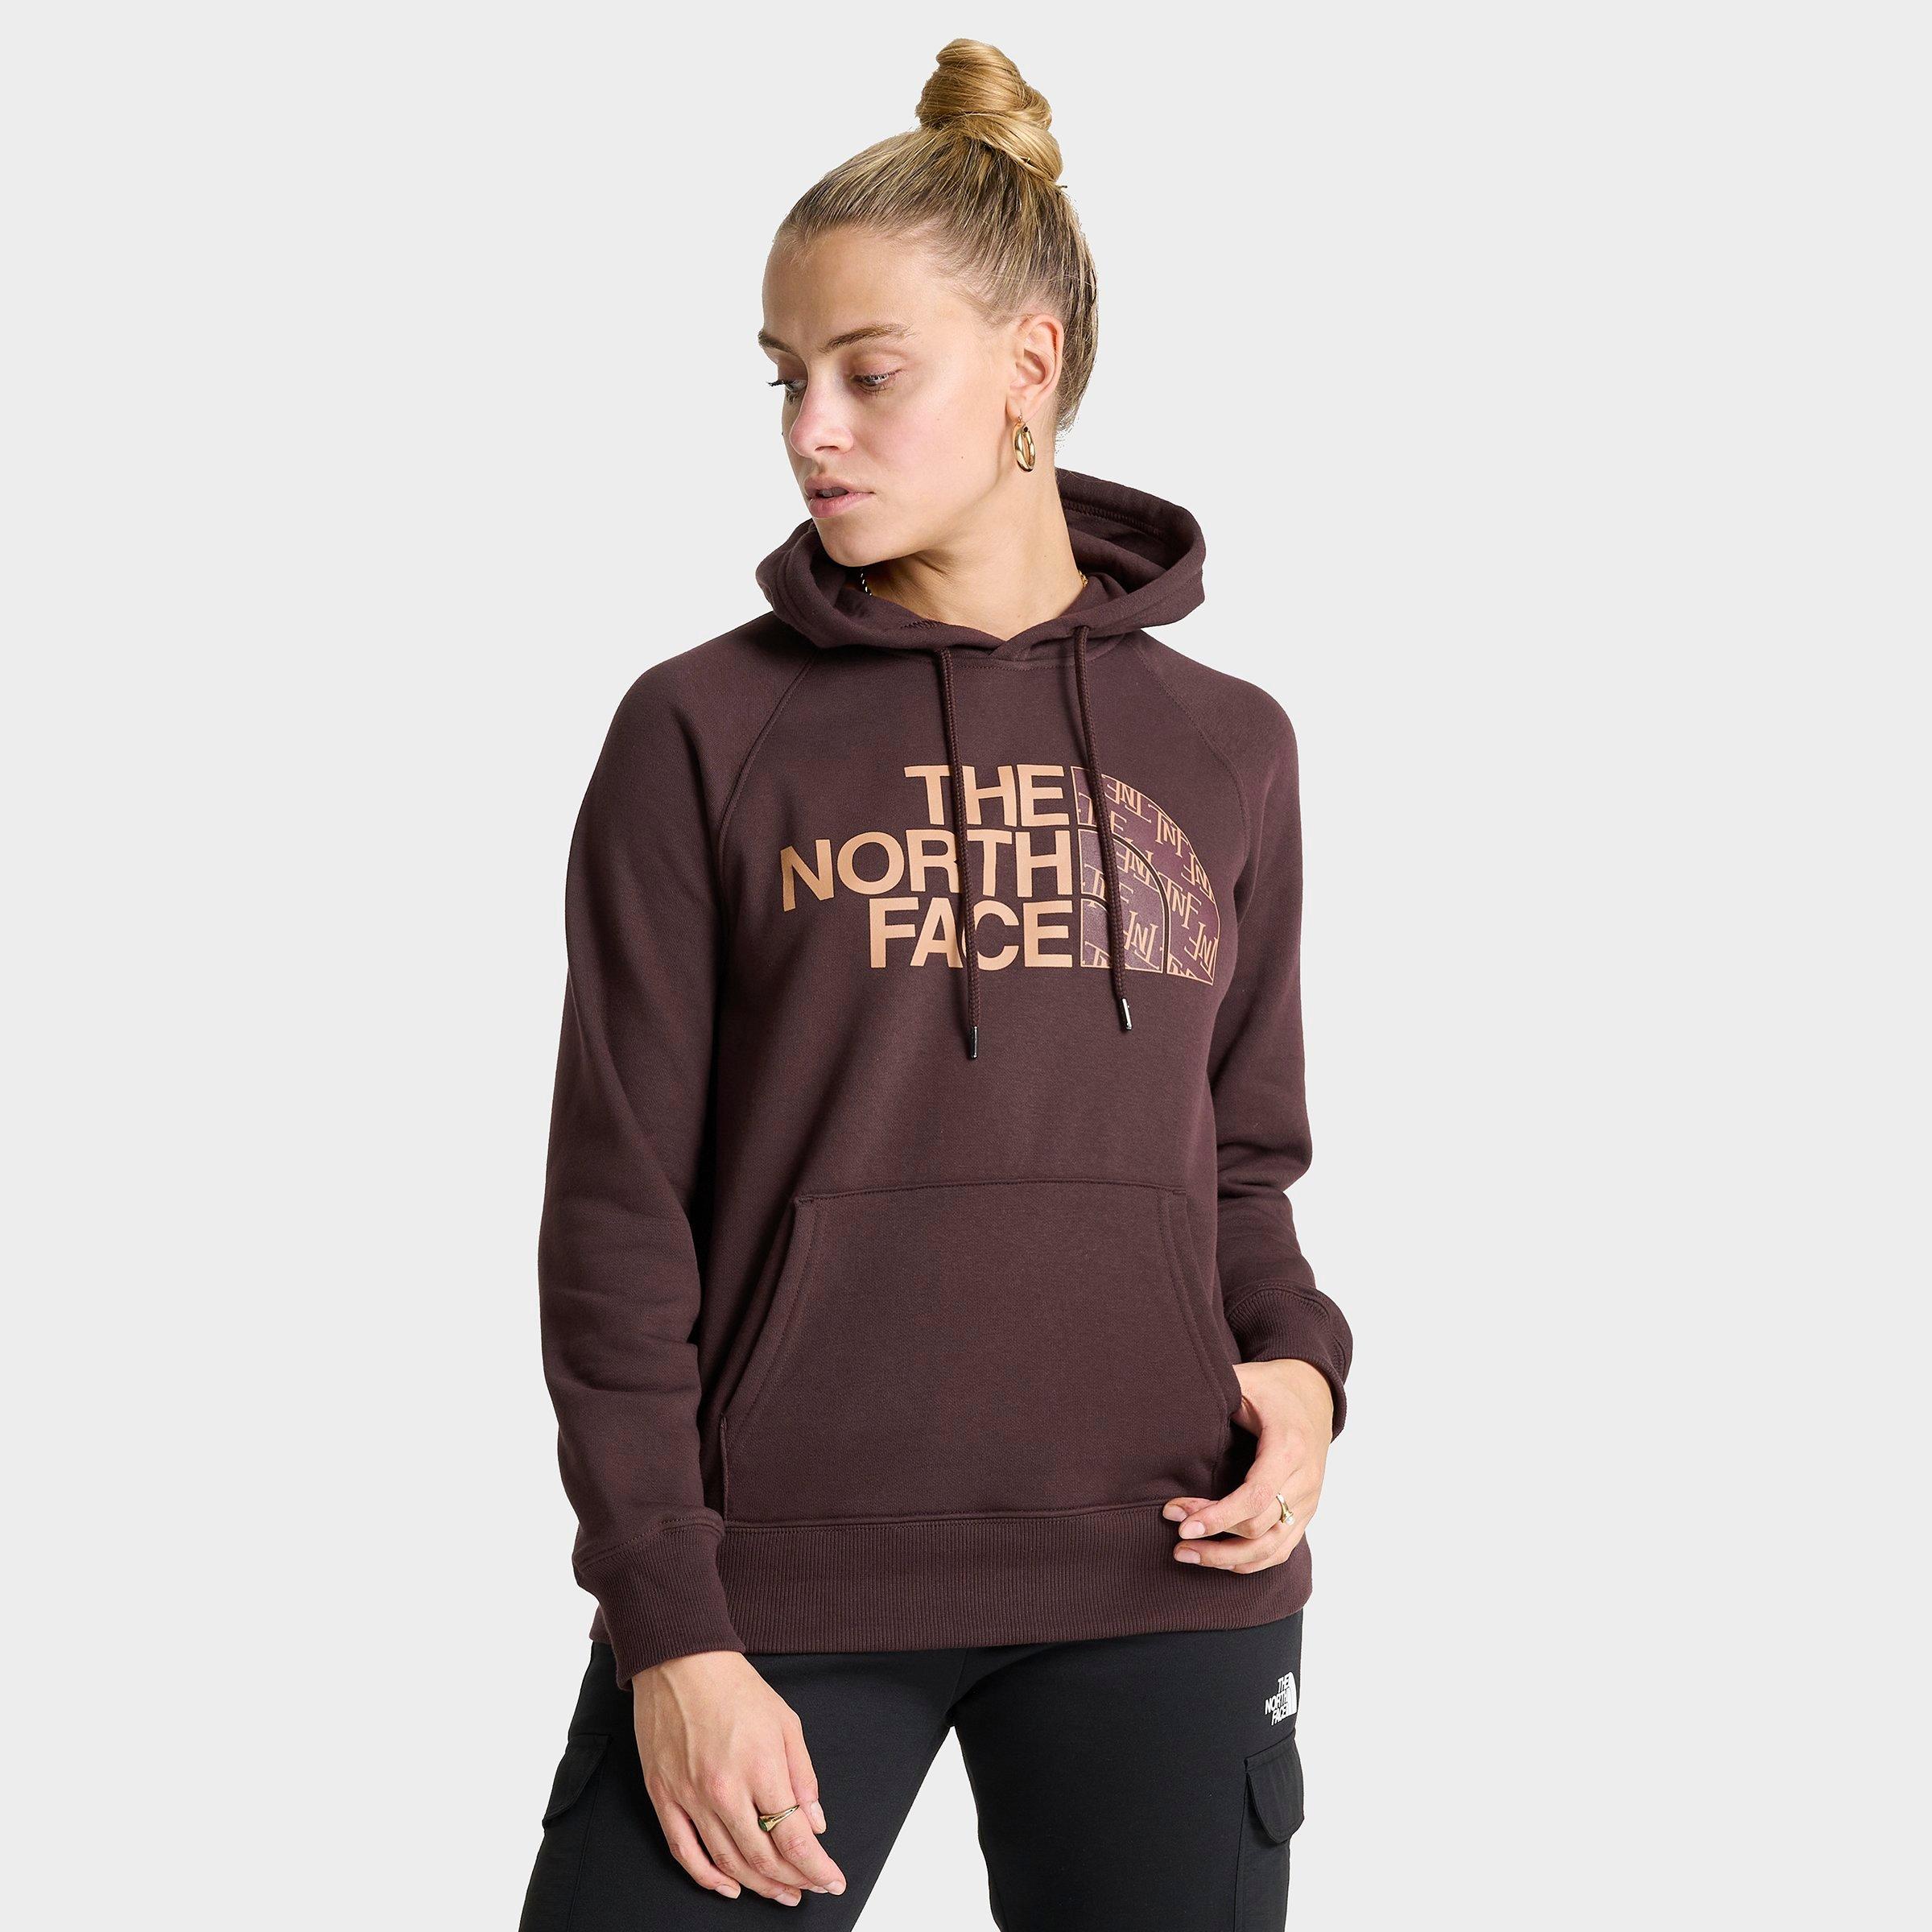 THE NORTH FACE THE NORTH FACE INC WOMEN'S HALF DOME PULLOVER HOODIE